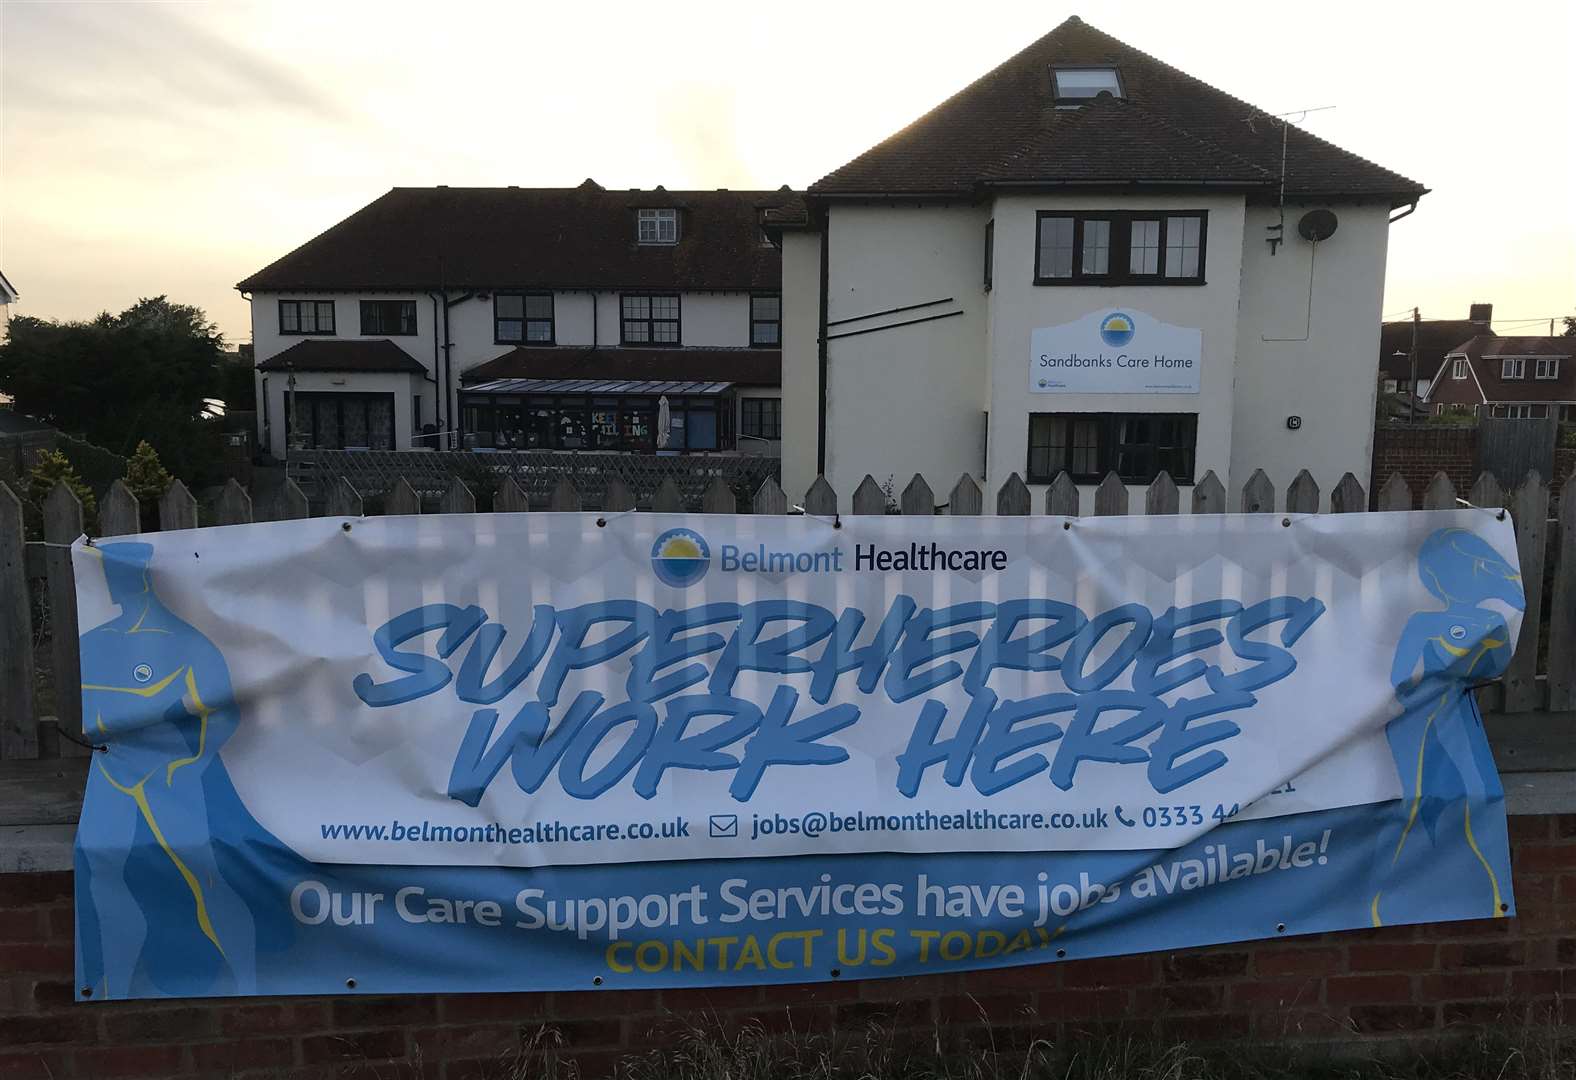 Sandbanks Care Home will close and plans are afoot to transform it into flats